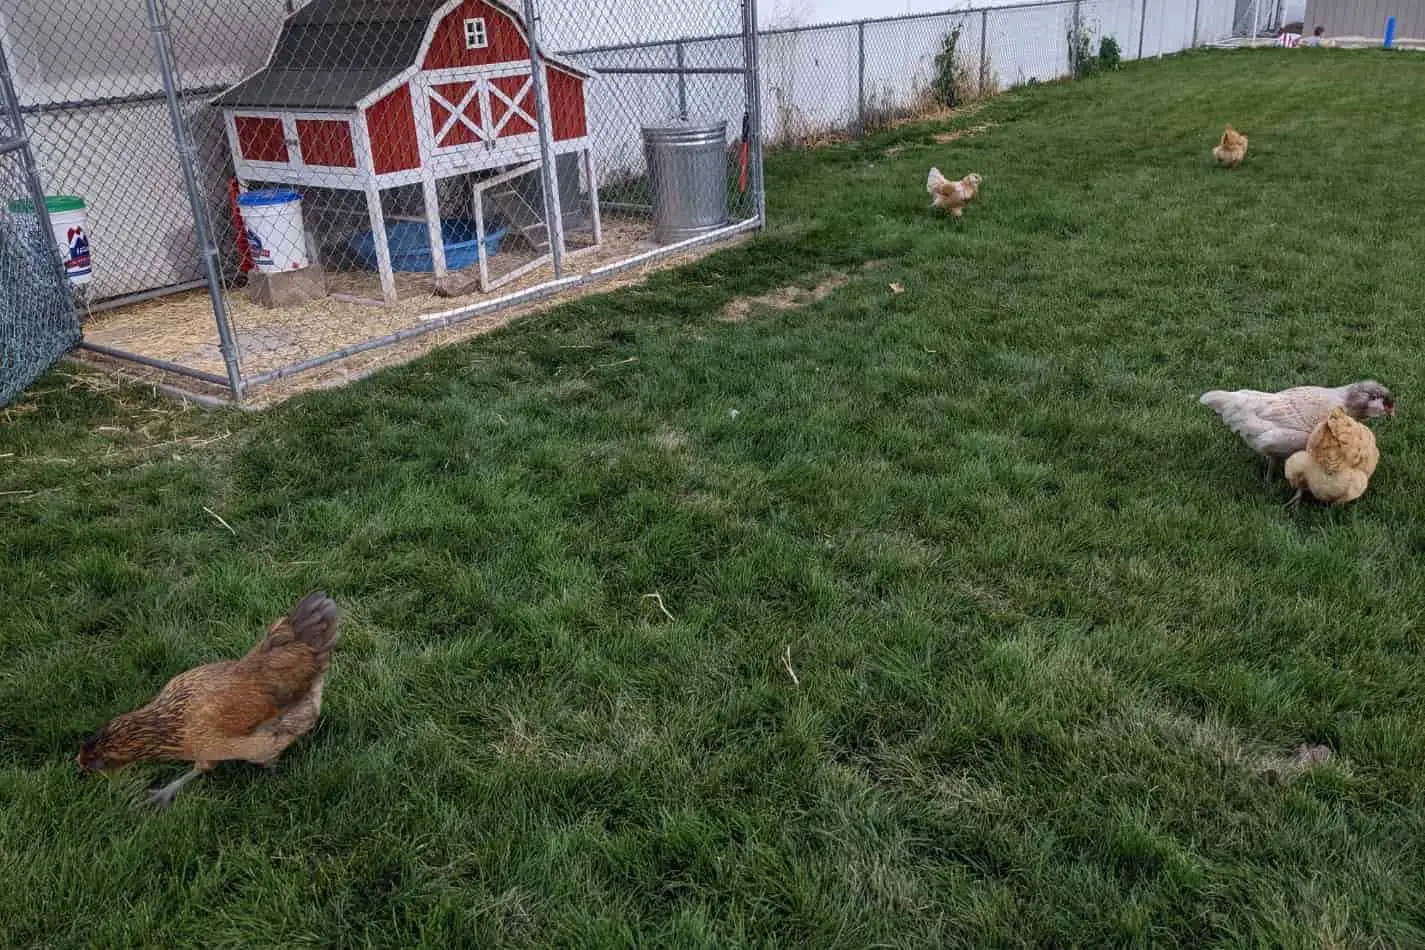 An image of our free-ranging chickens in our backyard and their chicken coop wired in protection against hawks.